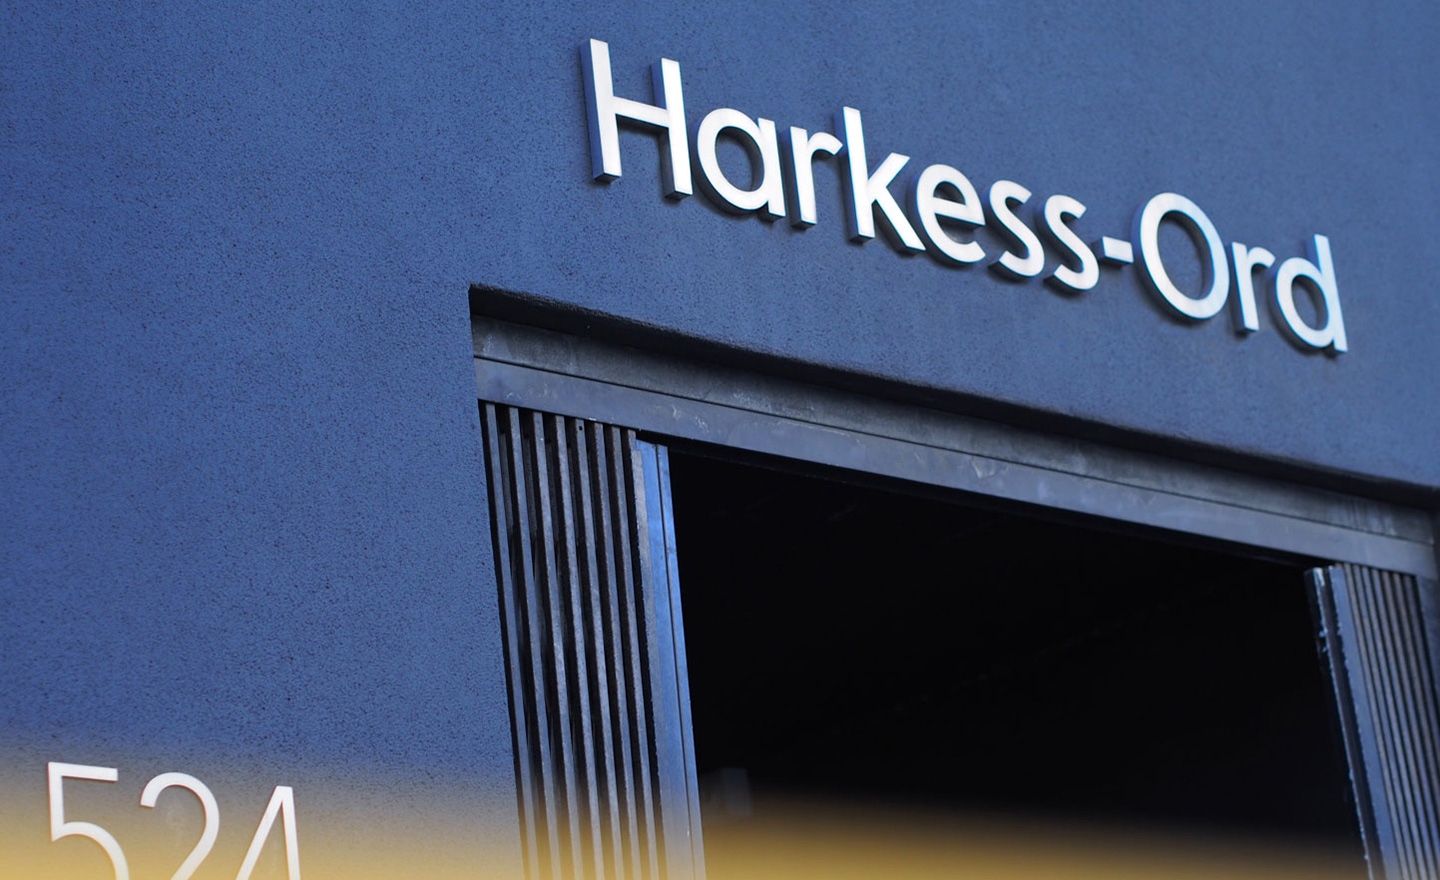 Harkess-Ord Melbourne Office Entry